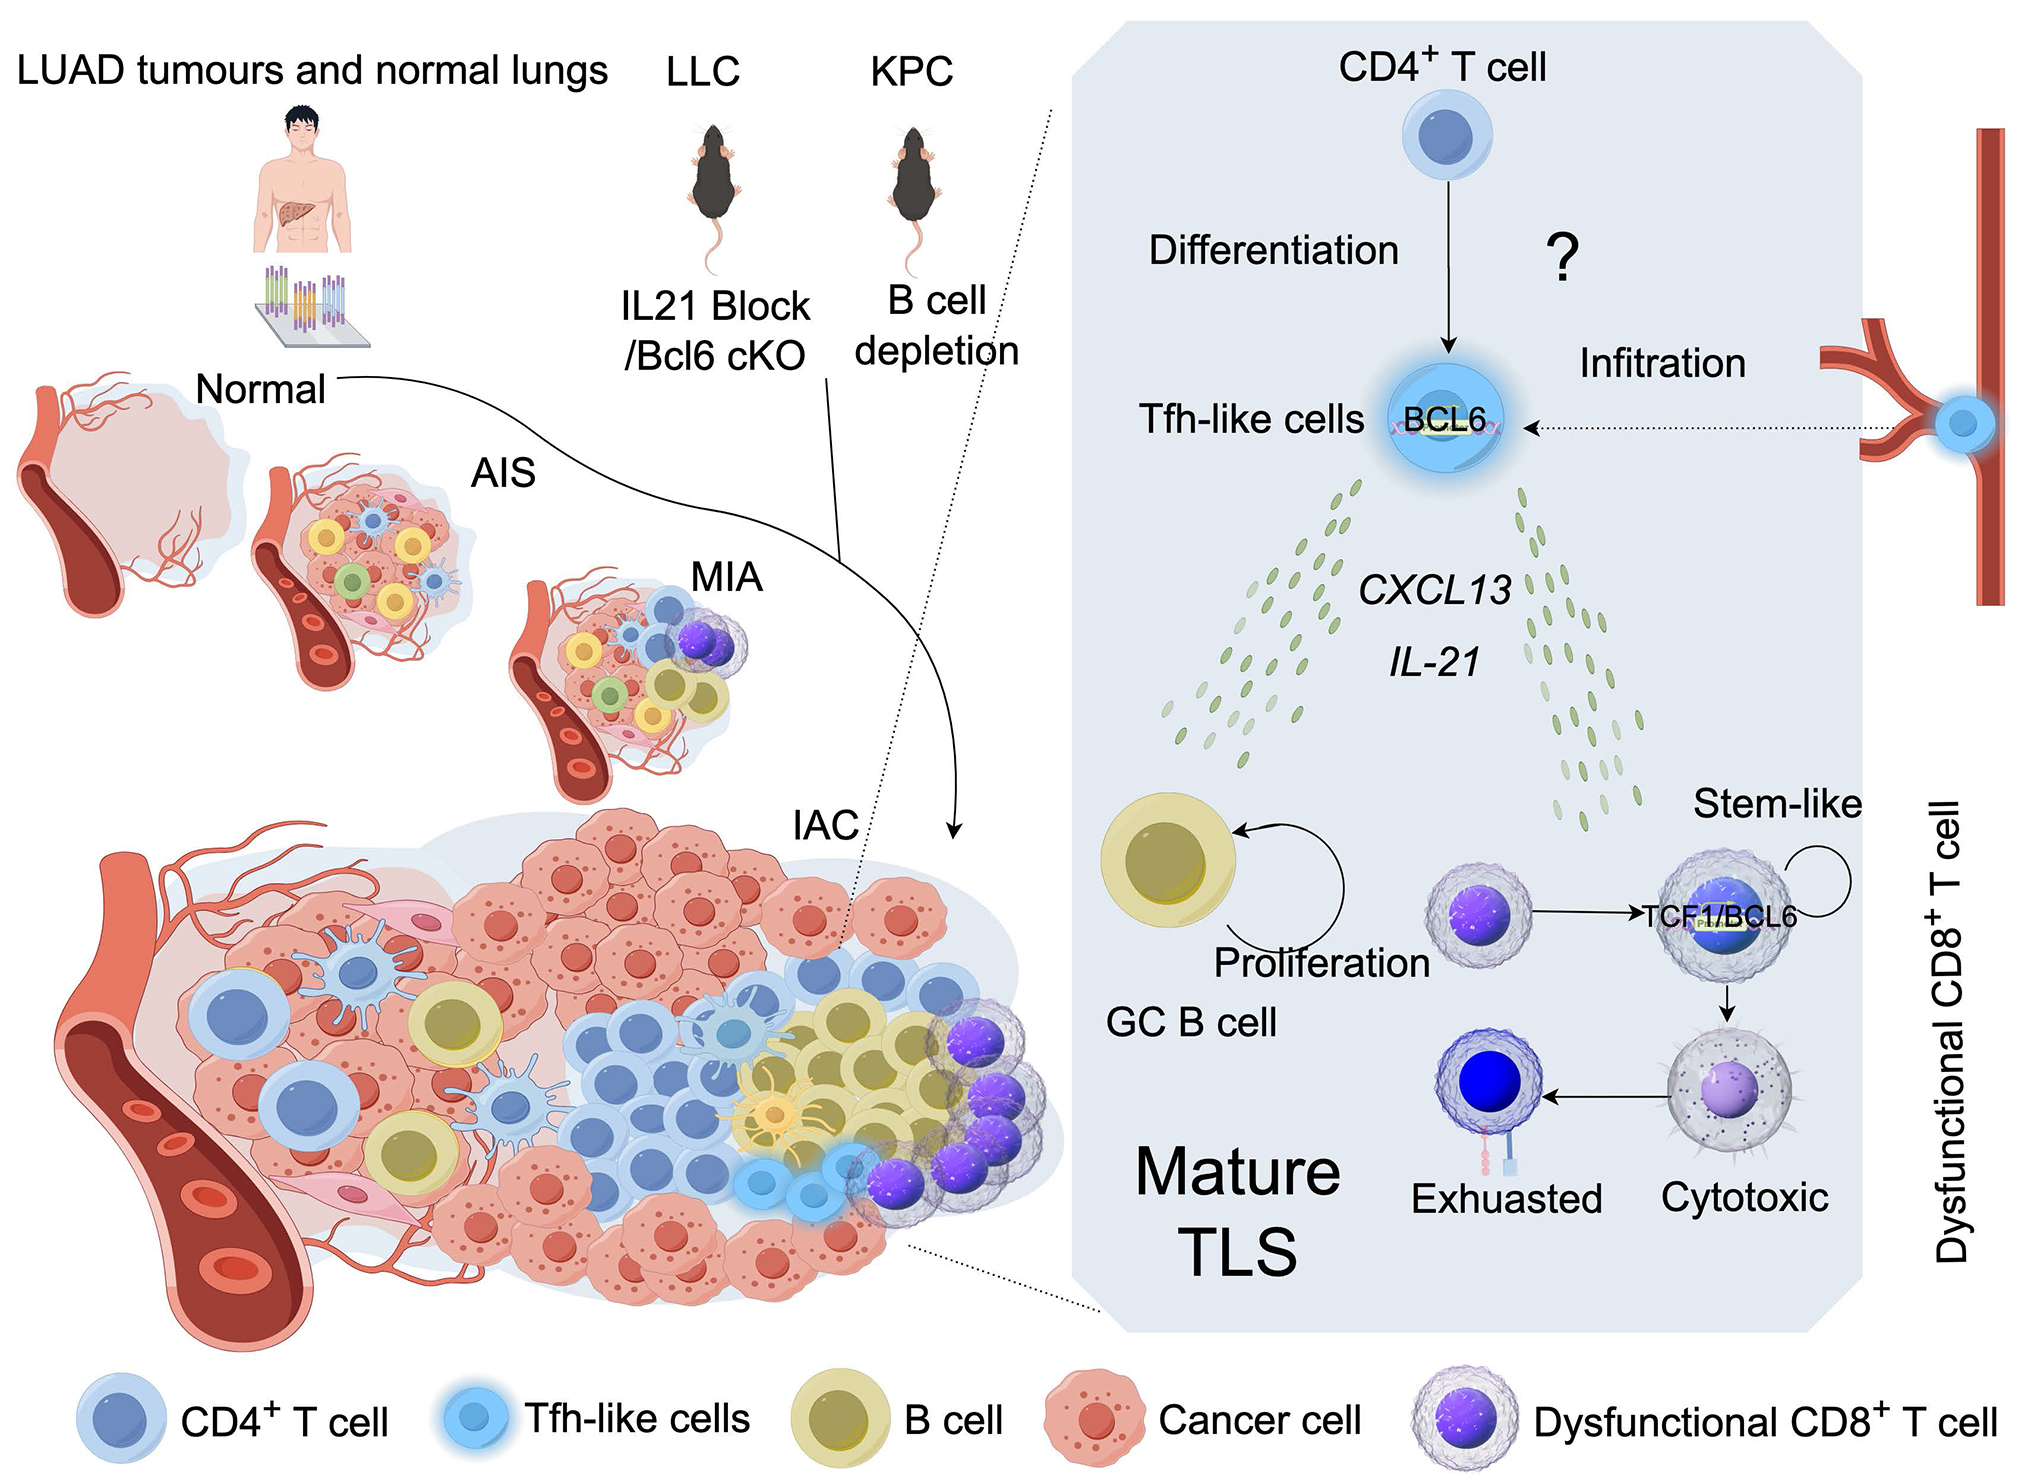 Mapping the immune terrain in lung adenocarcinoma progression: Tfh-like cells in tertiary lymphoid structures